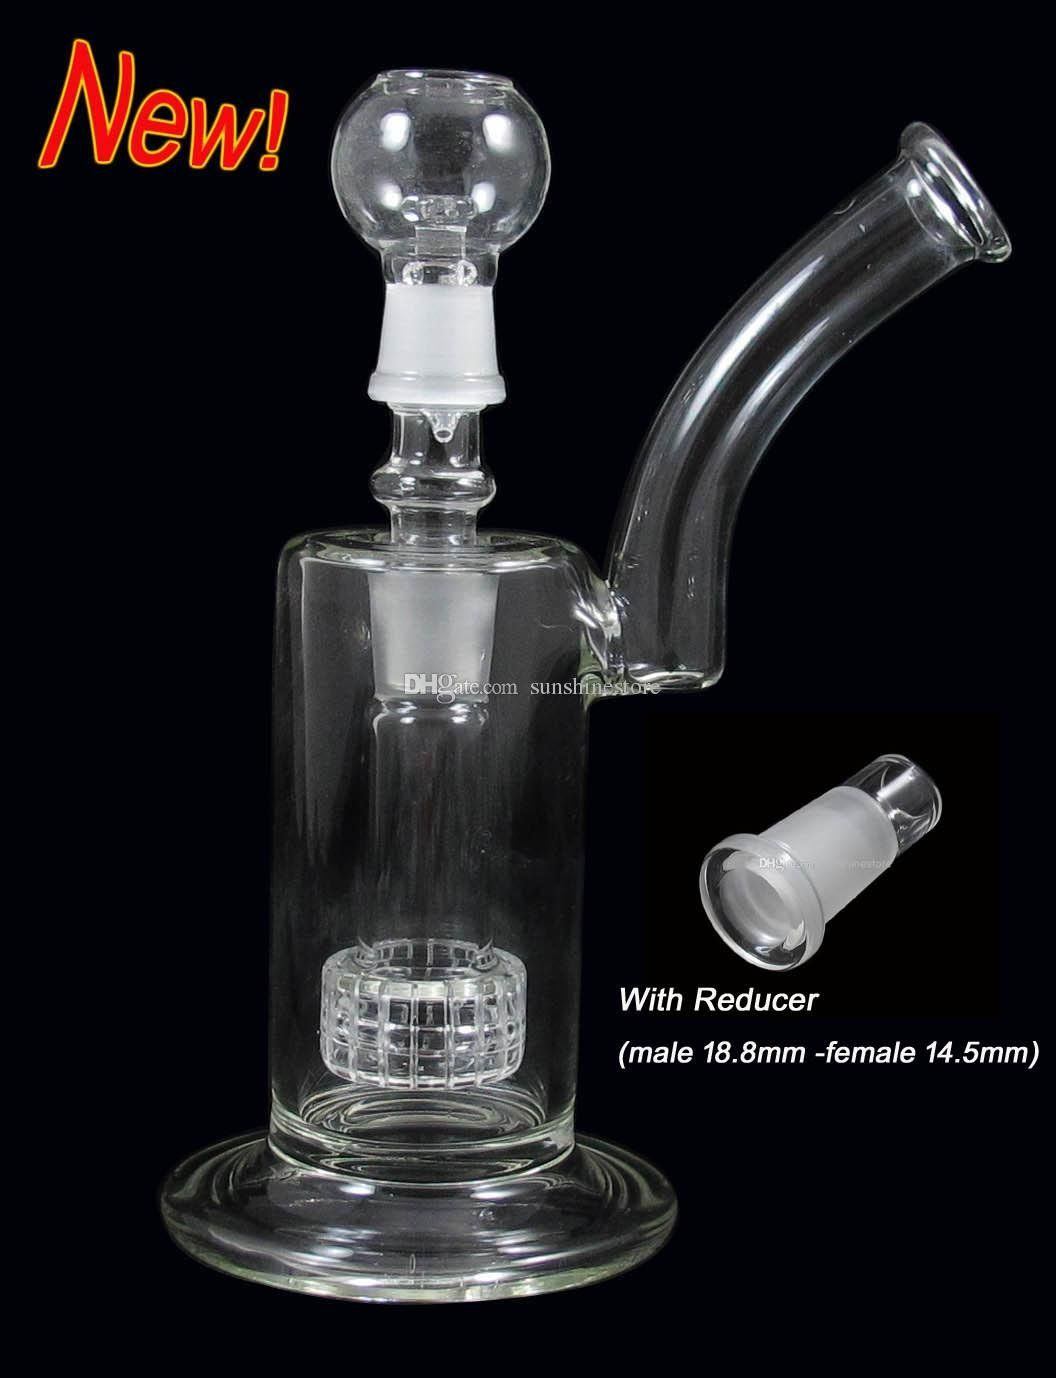 Zils M. reccomend Glass pieces for smoking